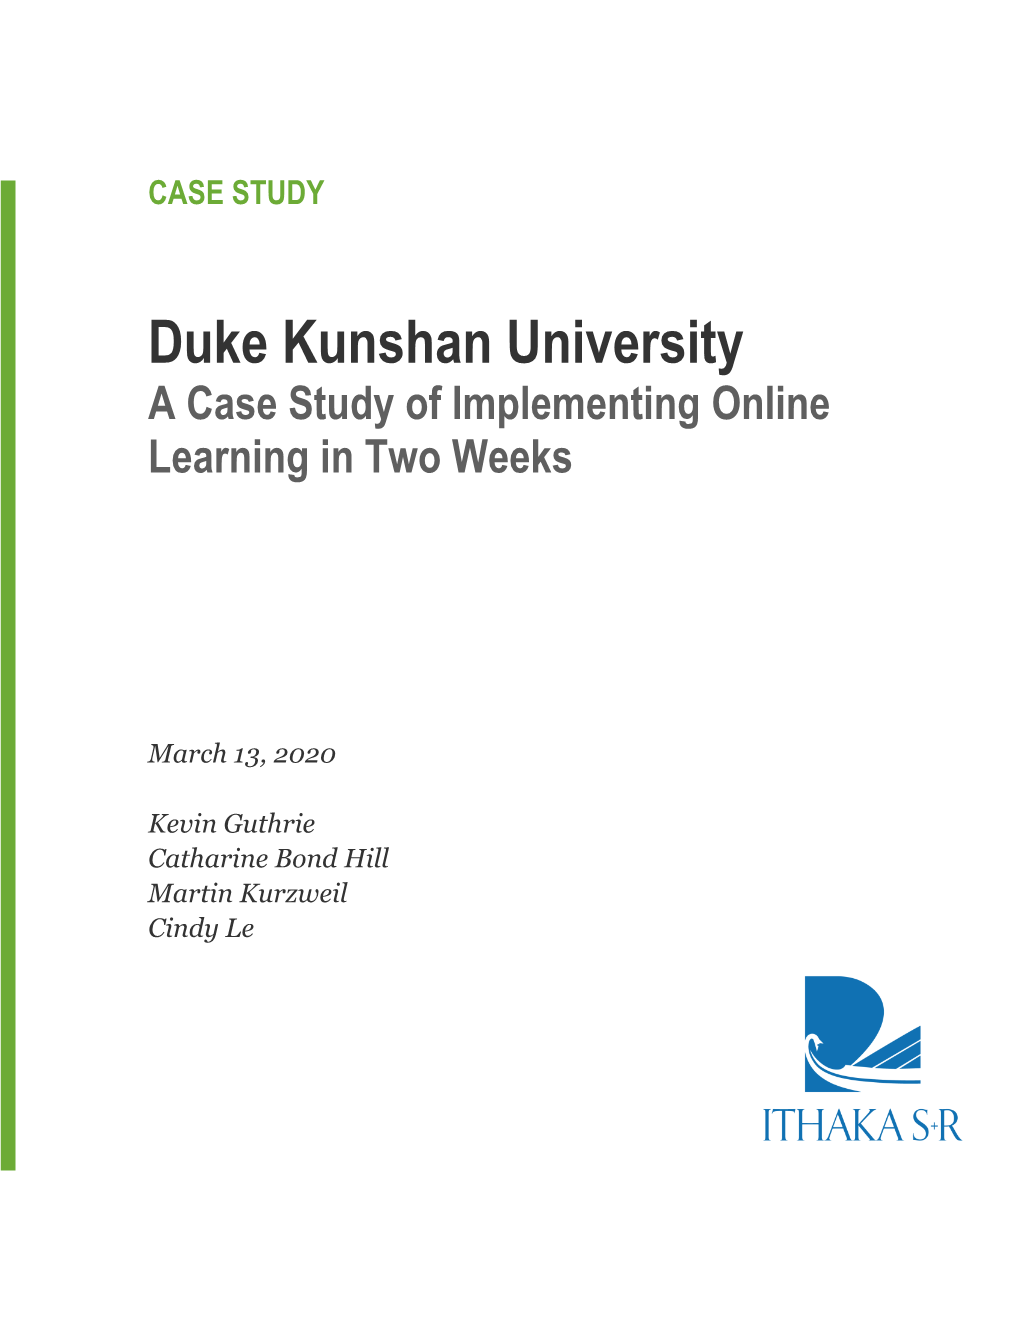 Duke Kunshan University a Case Study of Implementing Online Learning in Two Weeks